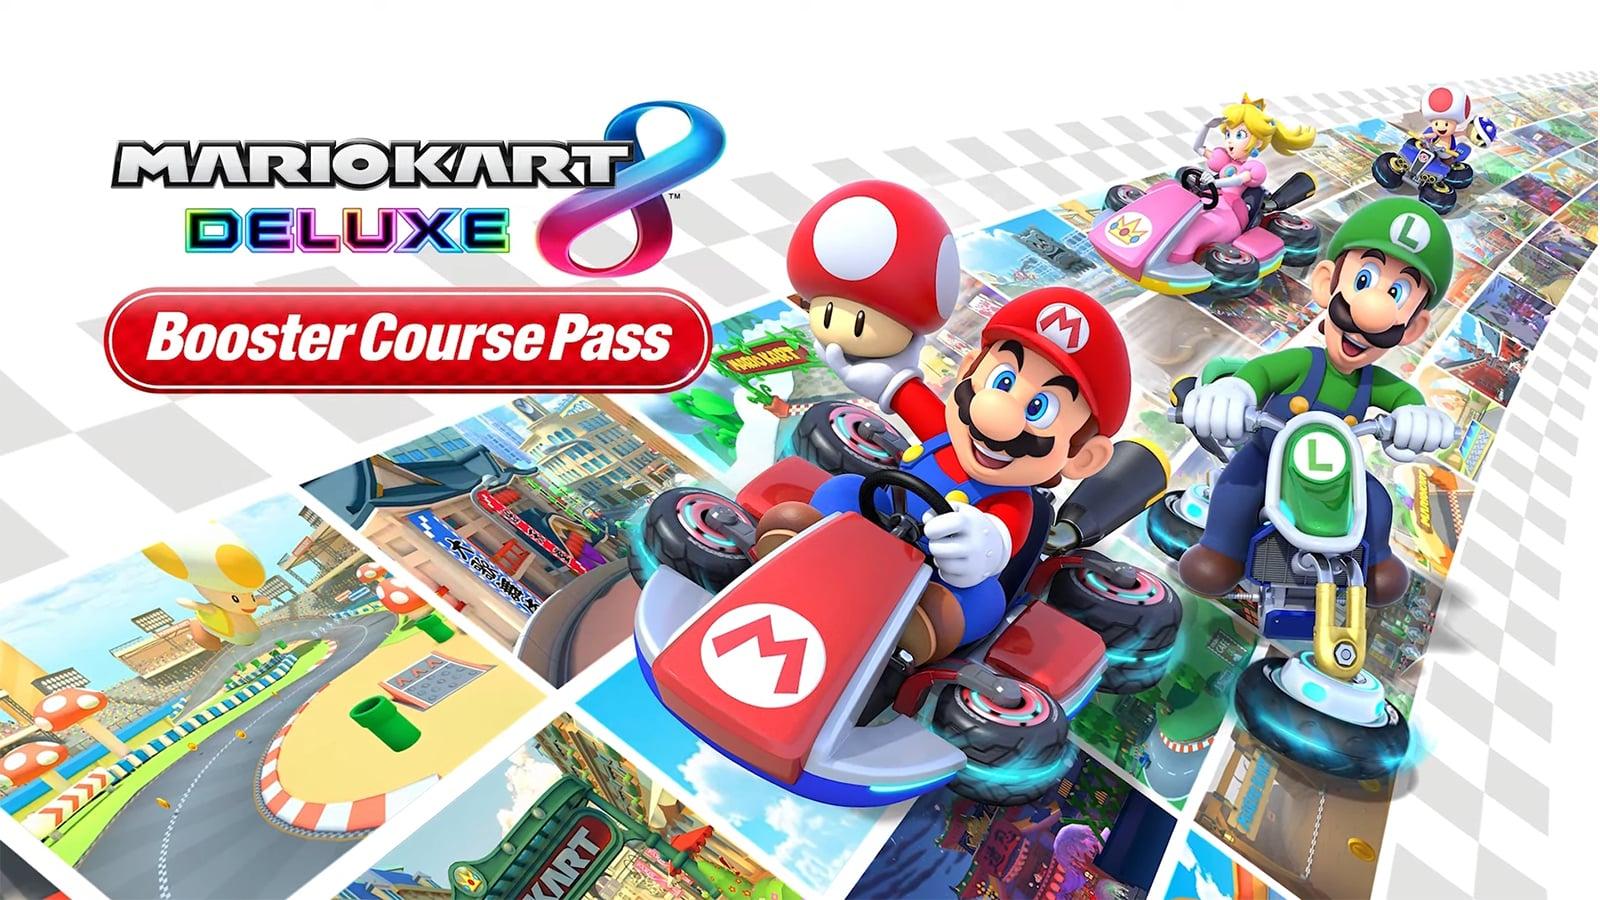 Mario Kart 8's new Booster Course Pass tracks betray their mobile